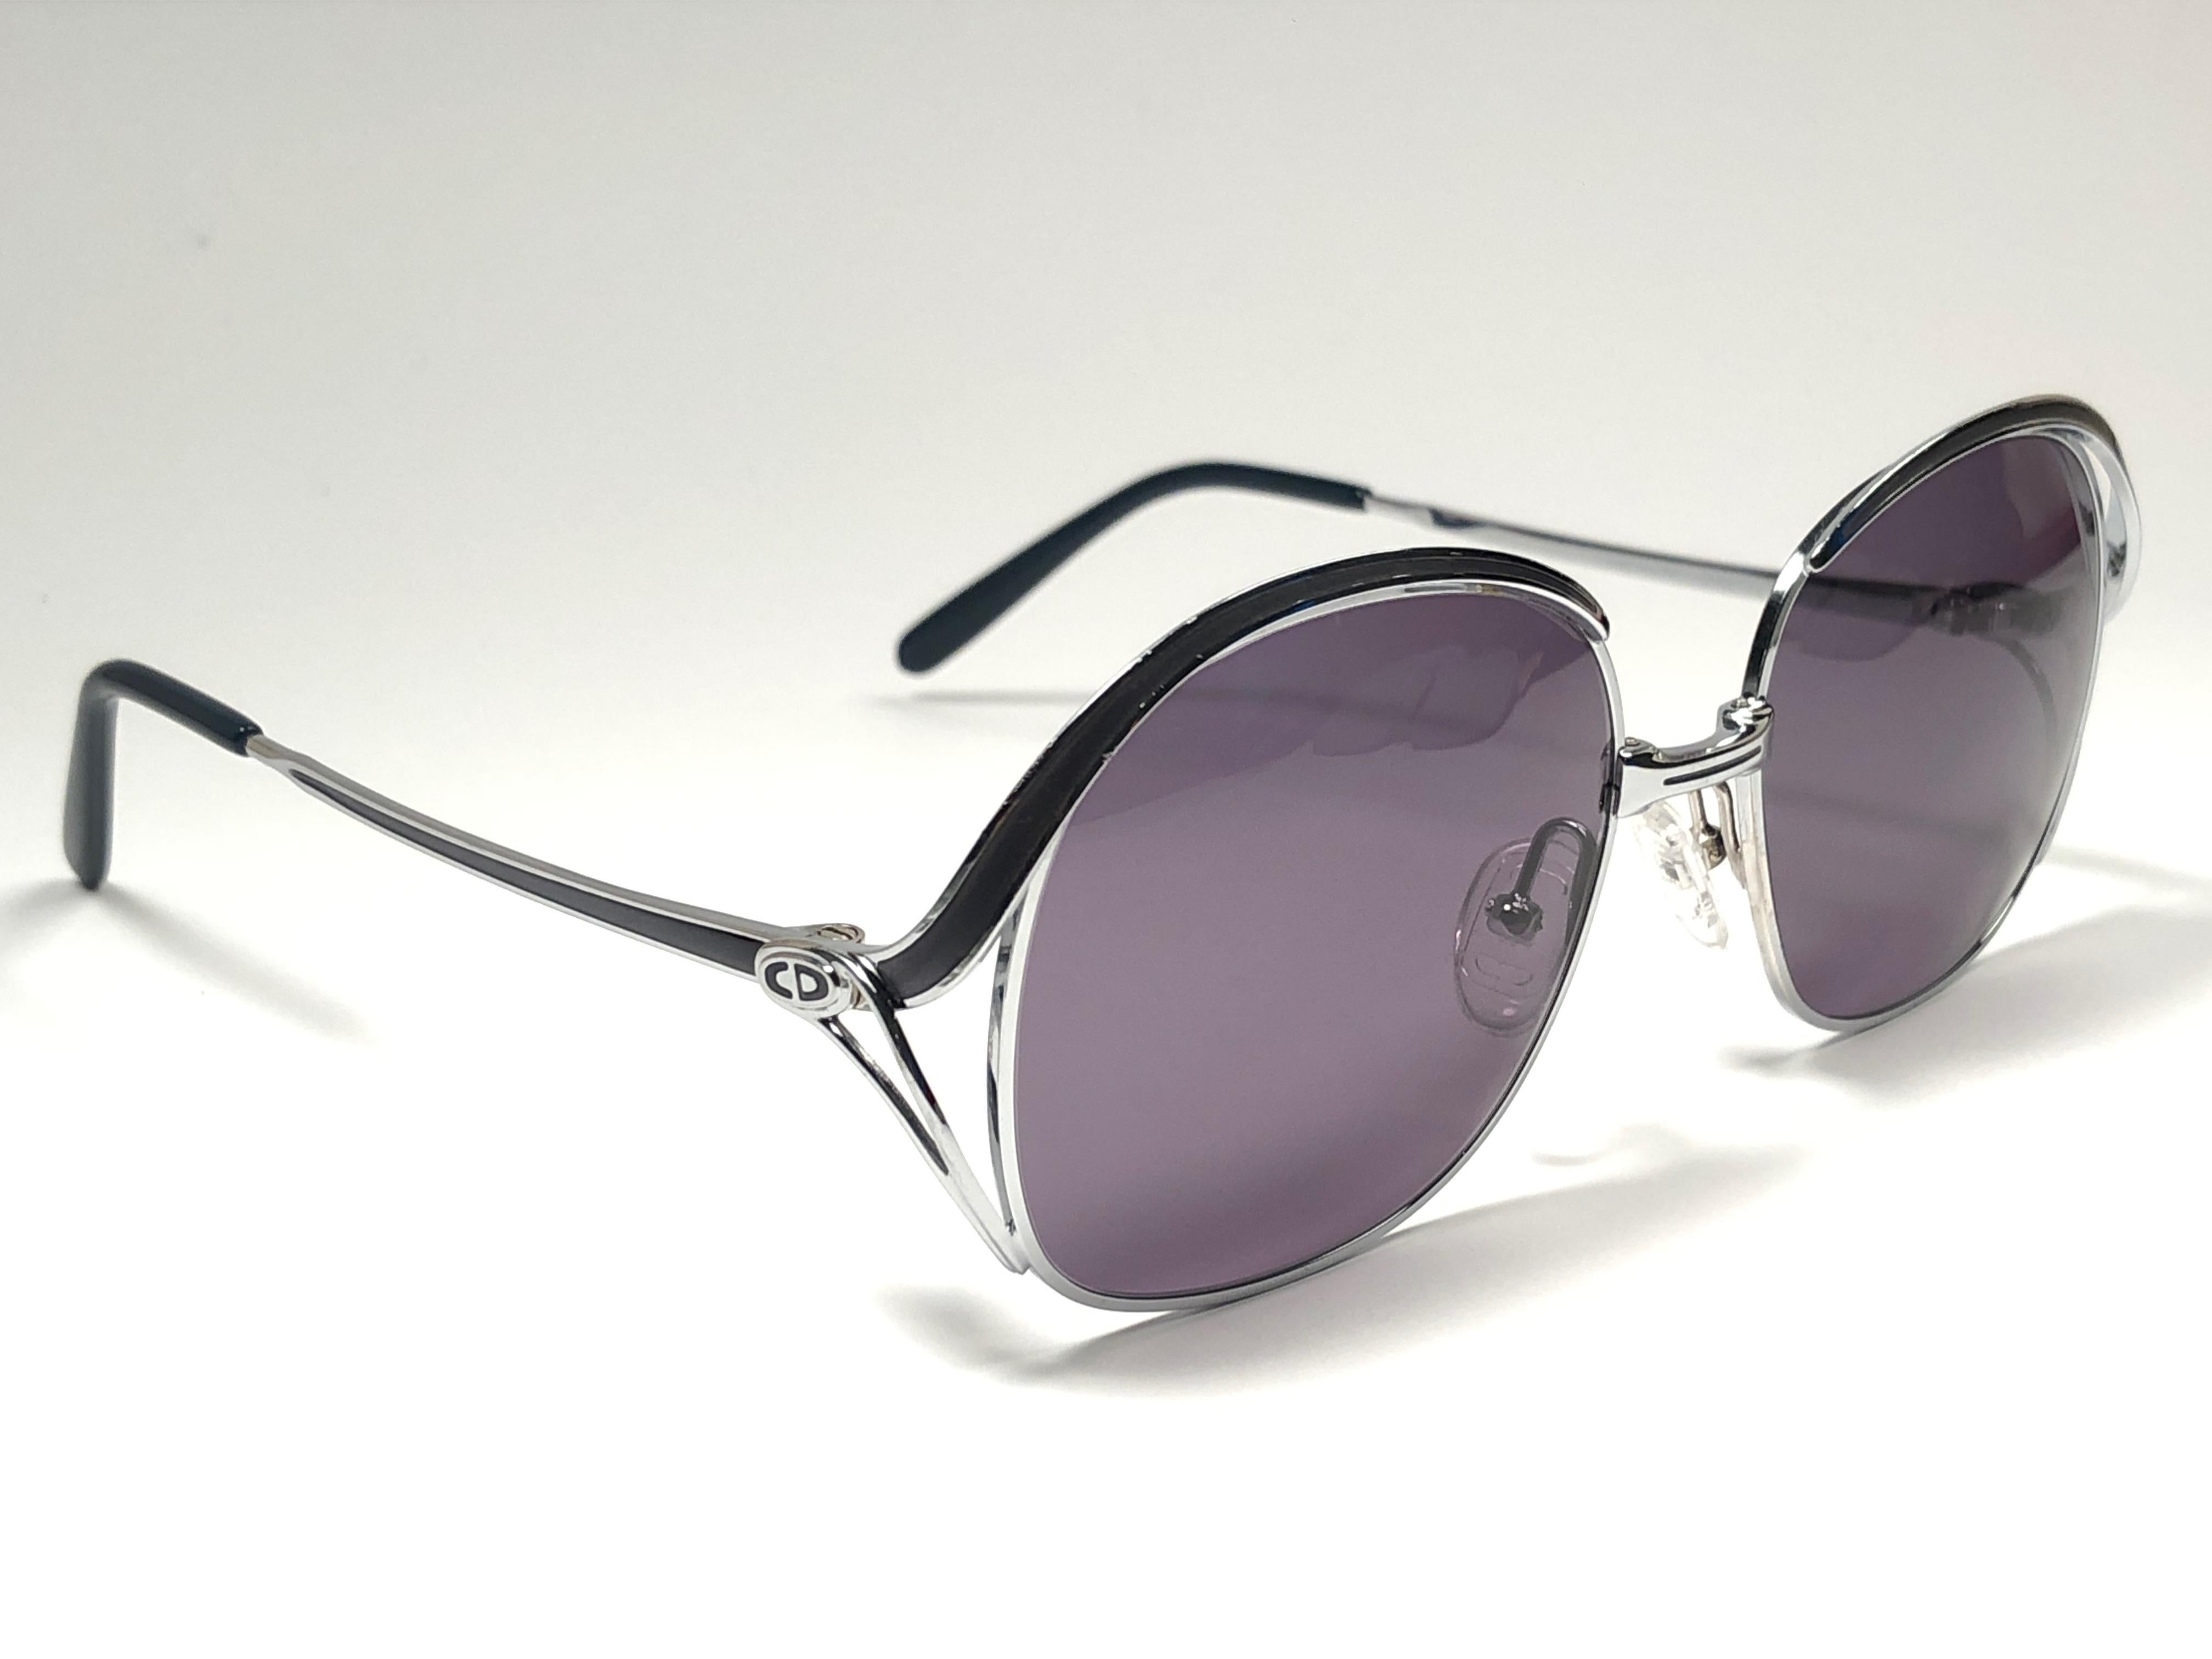 New Vintage Christian Dior 2145 Anthracite Silver Grey Sunglasses 1970's Austria In New Condition For Sale In Baleares, Baleares